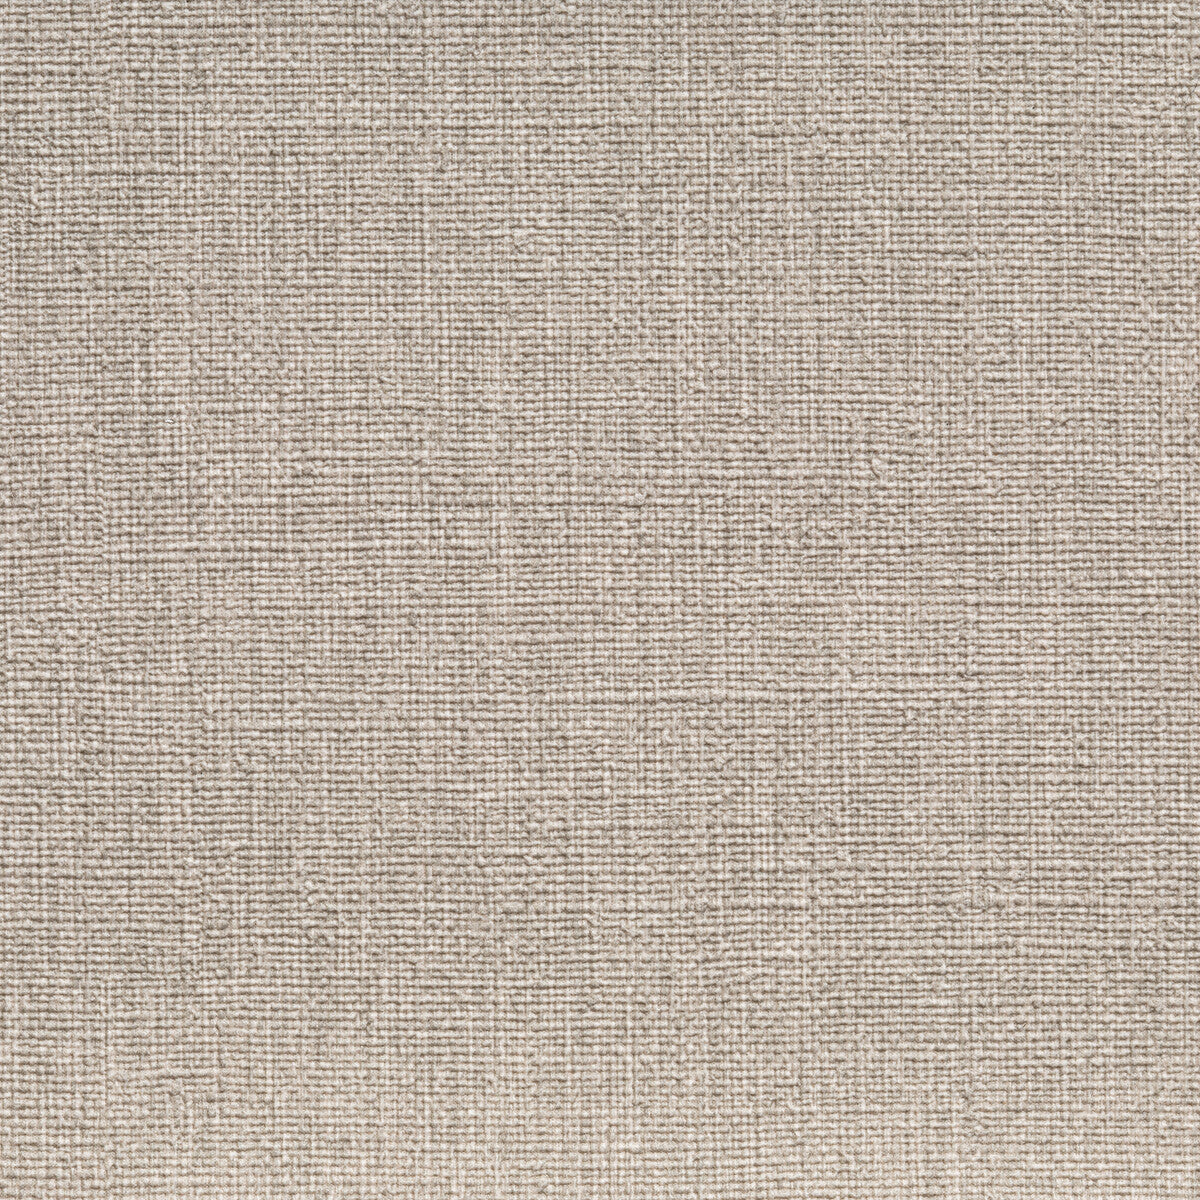 Caslin fabric in sandstone color - pattern CASLIN.11.0 - by Kravet Contract in the Foundations / Value collection